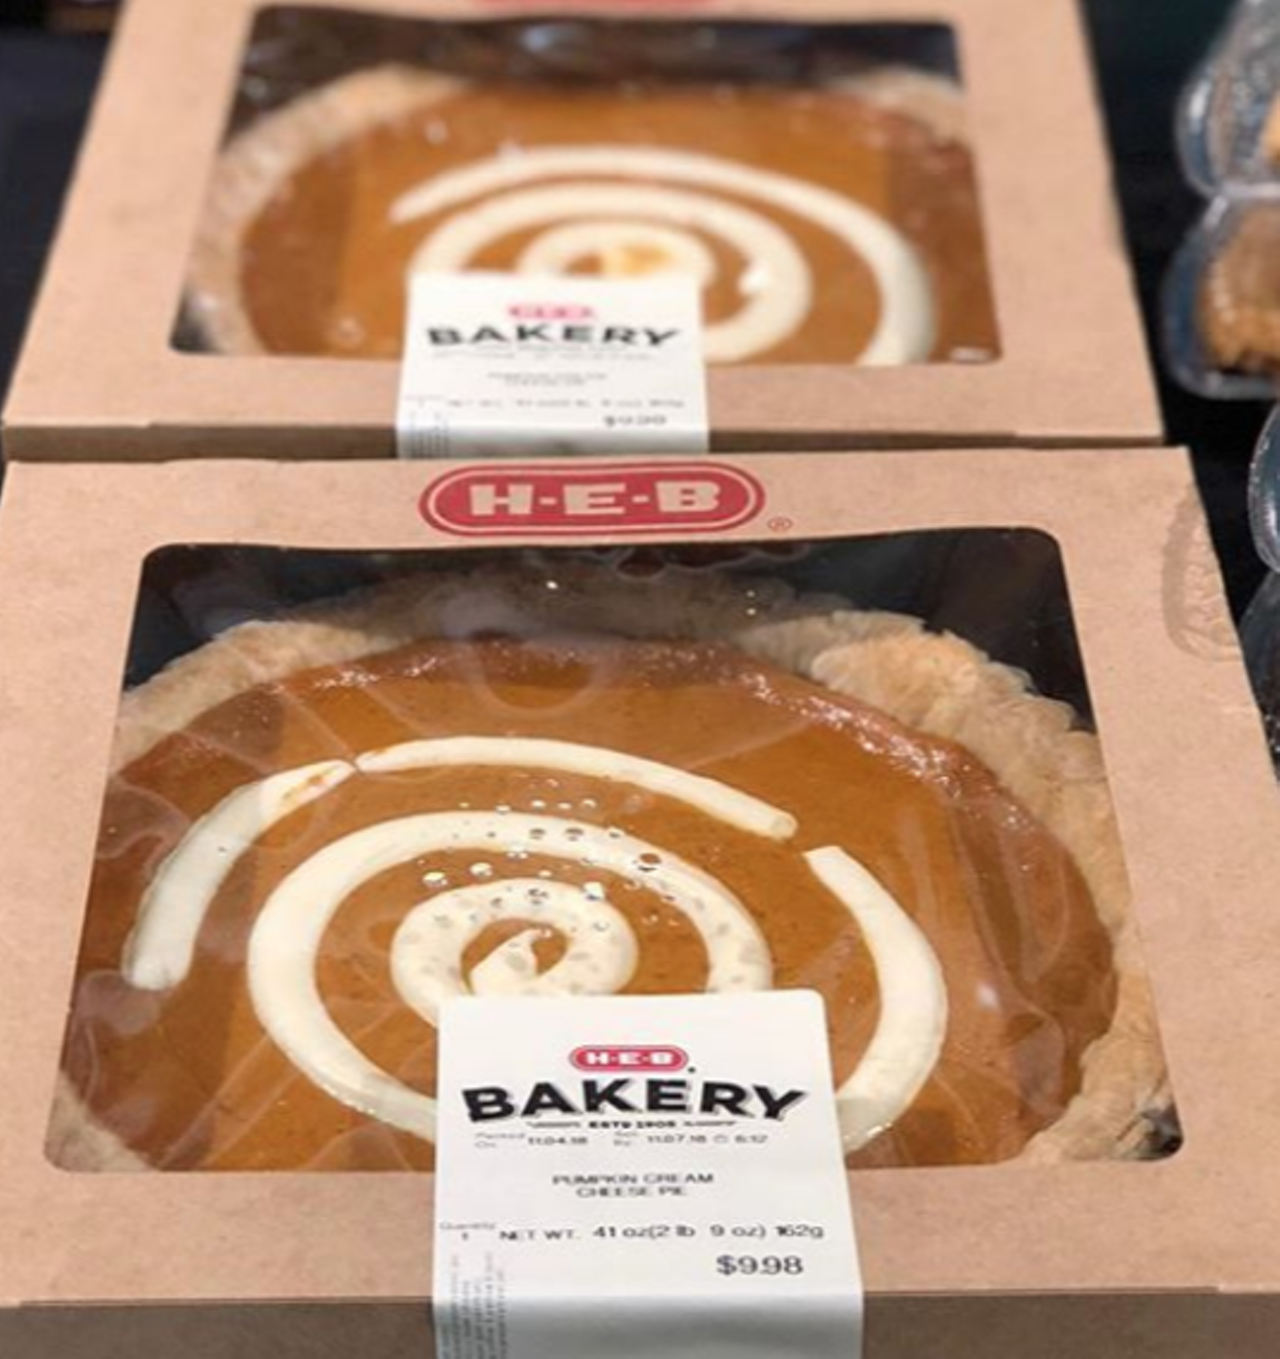 H-E-B
Multiple locations, heb.com
Whether you need a pie to take to your holiday party or just feel like stuffing your face and need a quick fix, you can trust the bakery at your local H-E-B to come through. It’s a tried-and-true favorite.
Photo via Instagram / heb